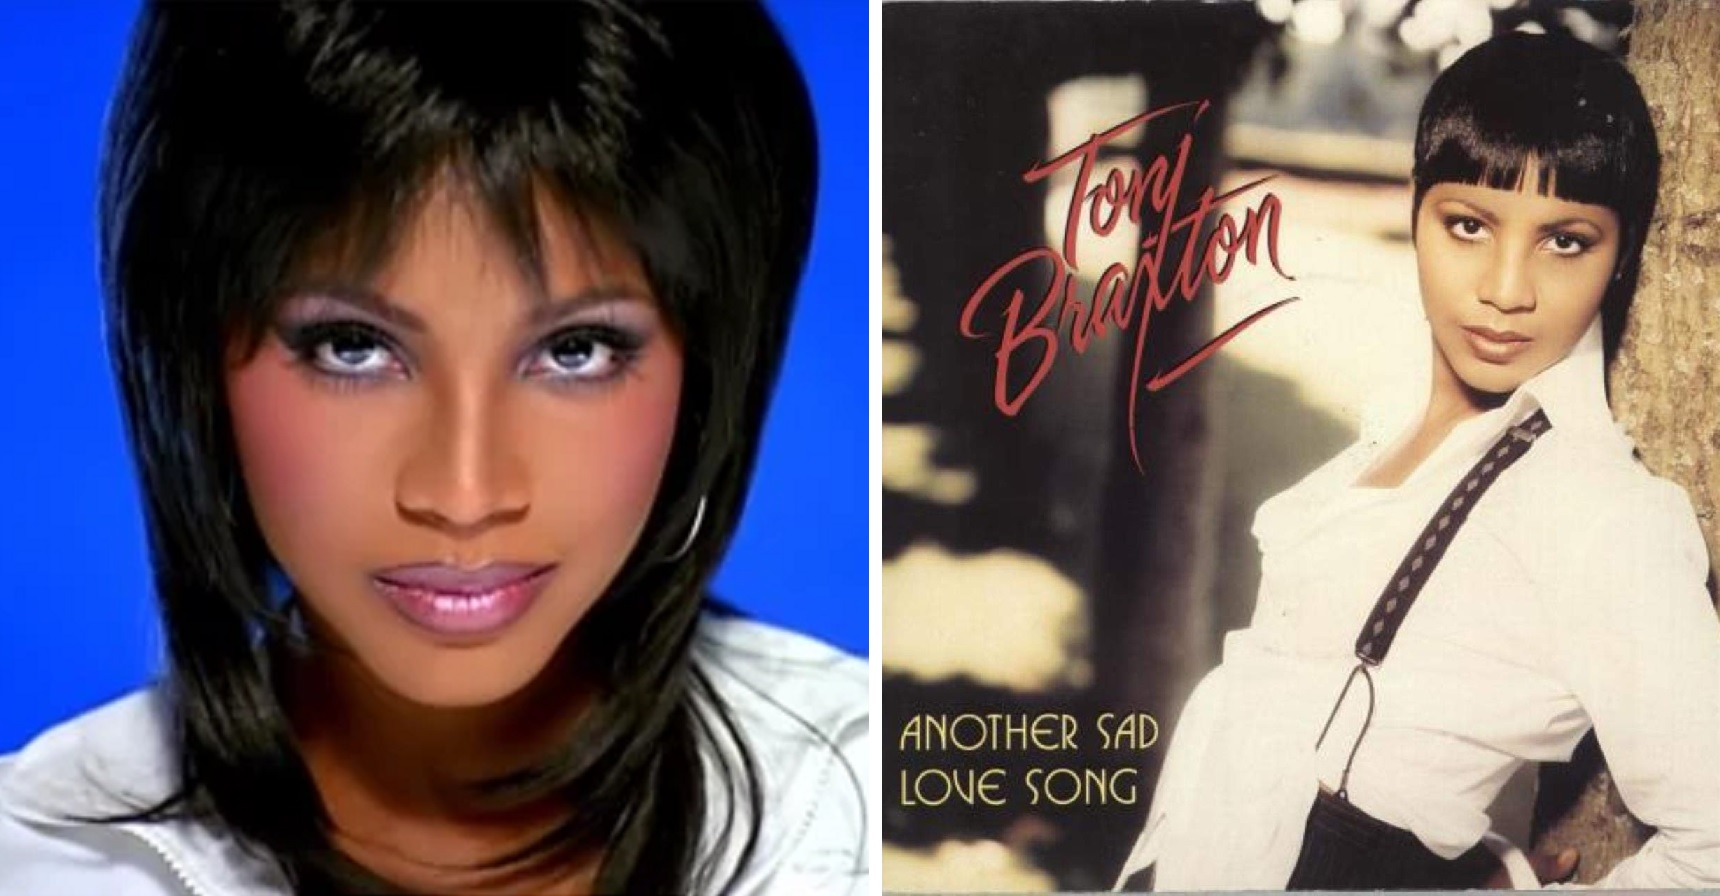 Top 10 Best Songs Of Toni Braxton – The Best Of R&B’s Vocal Goddess